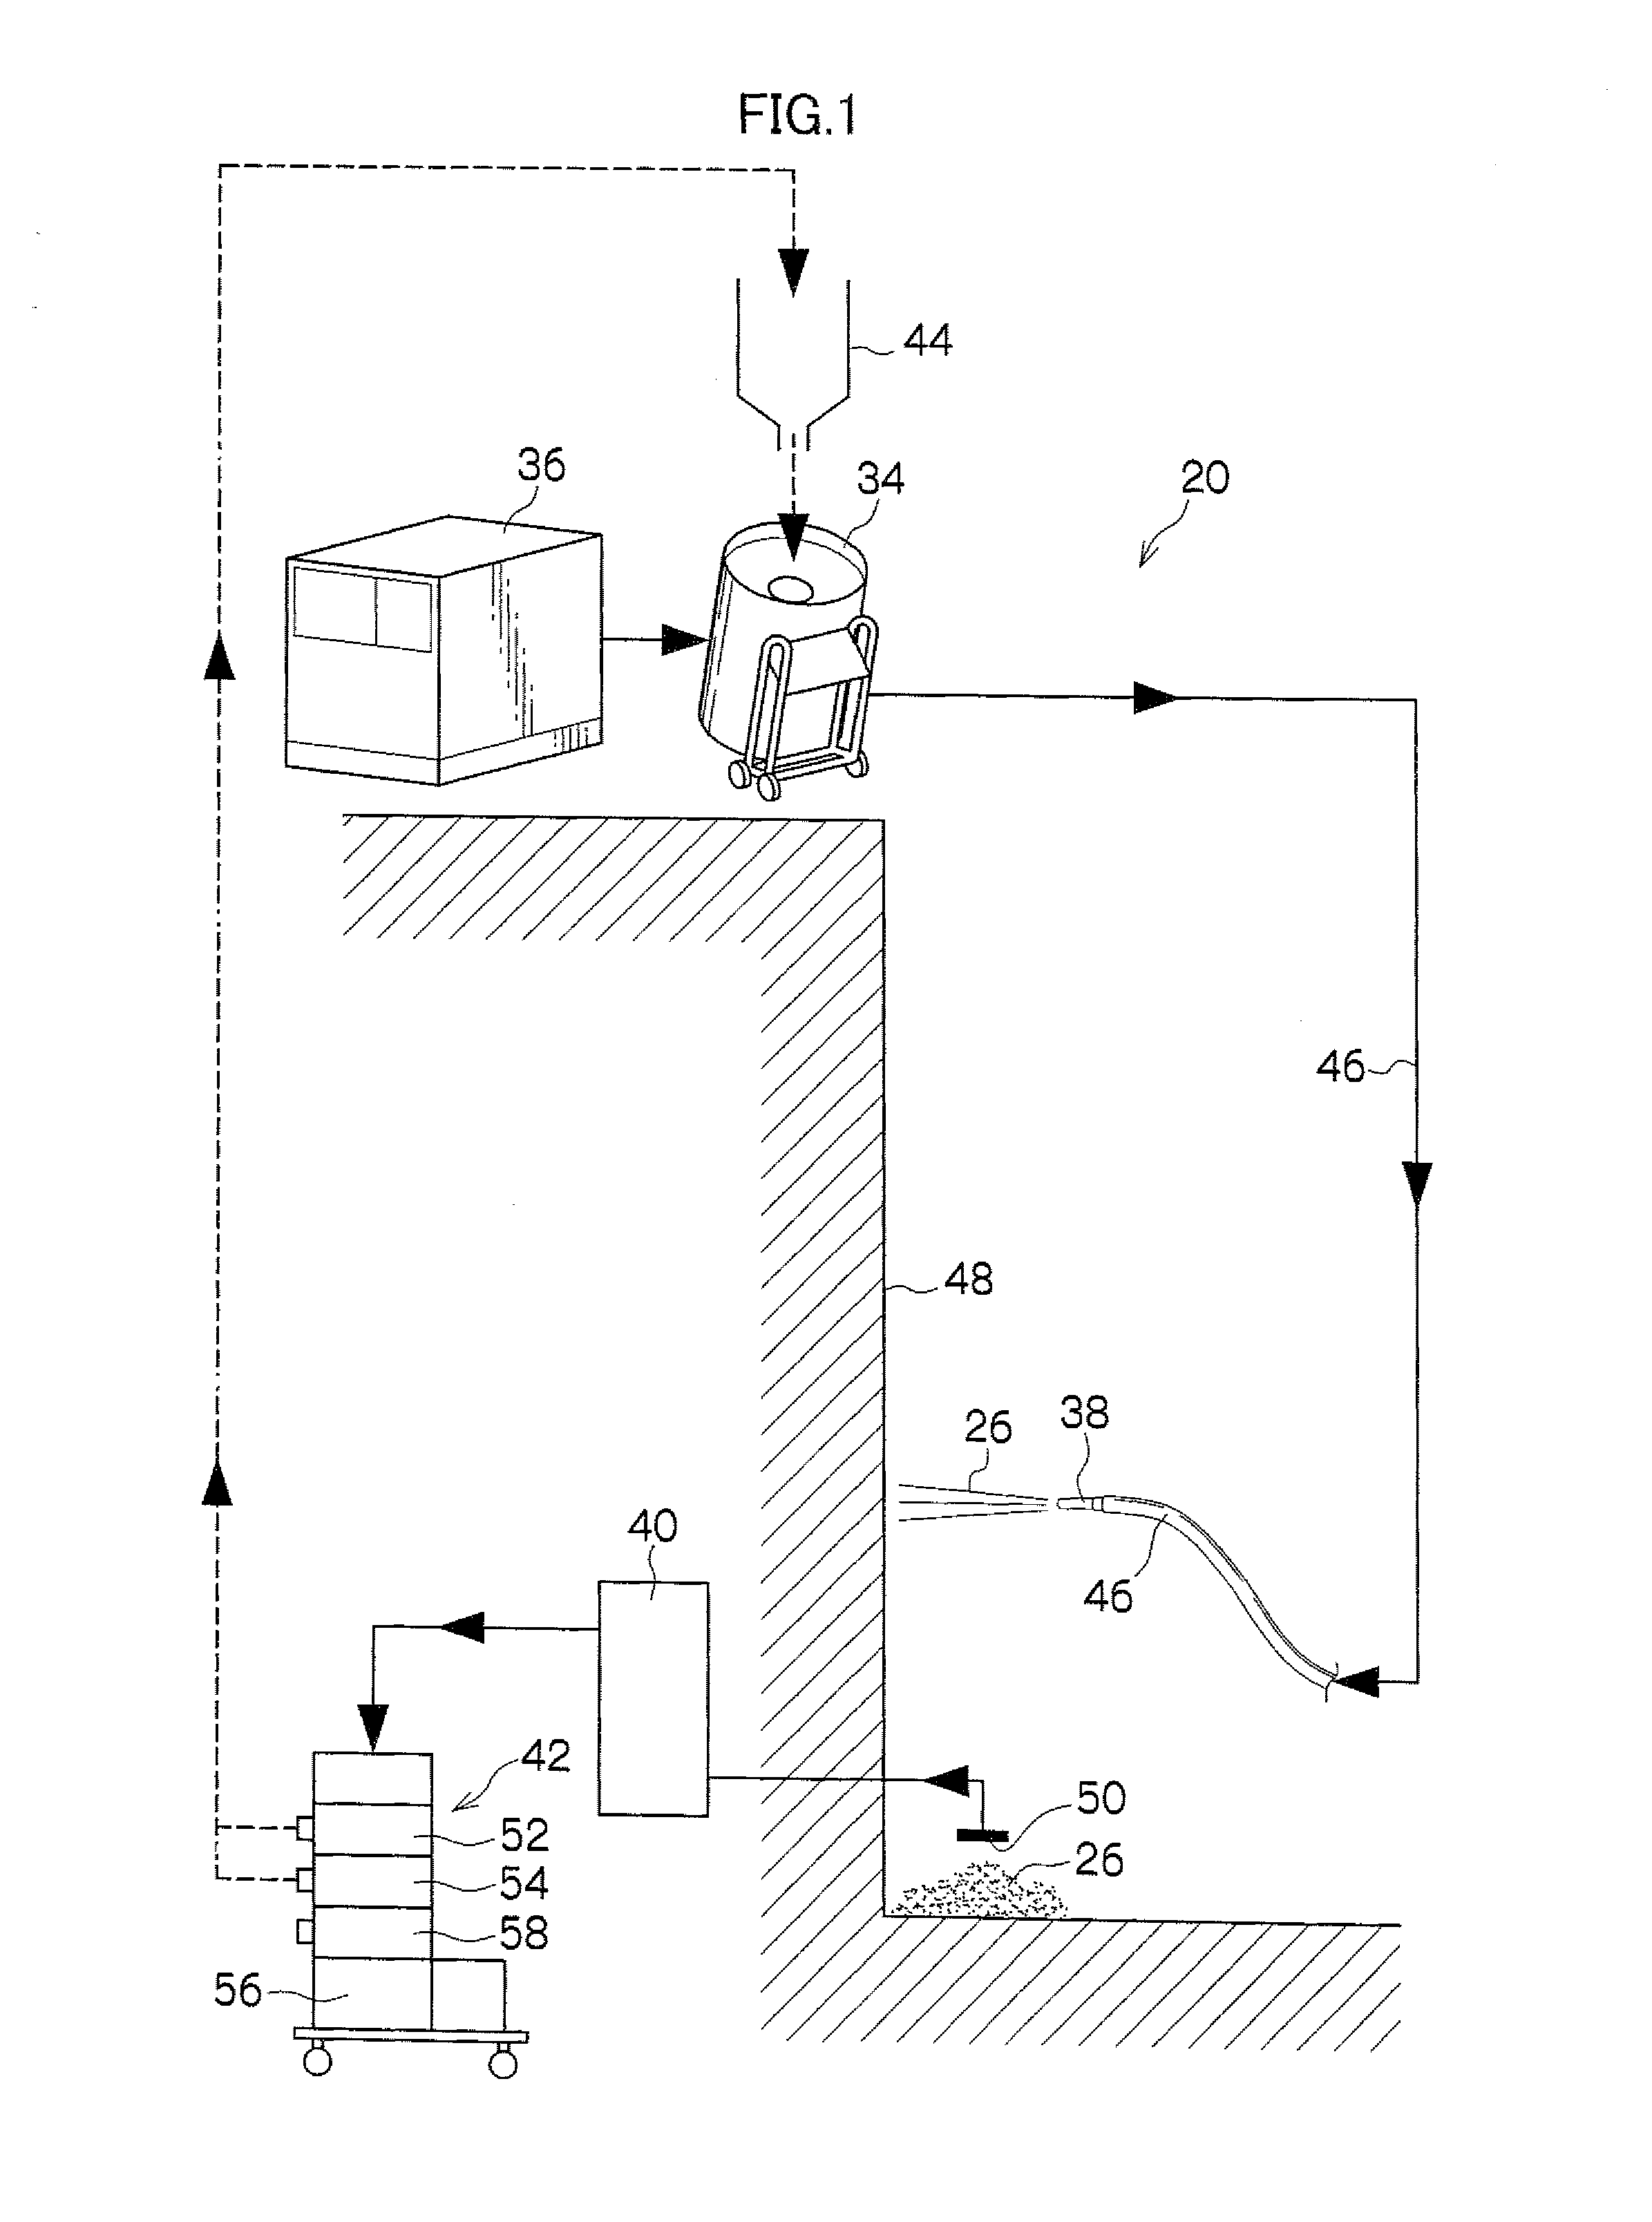 Blasting apparatus for outer surface of pipe